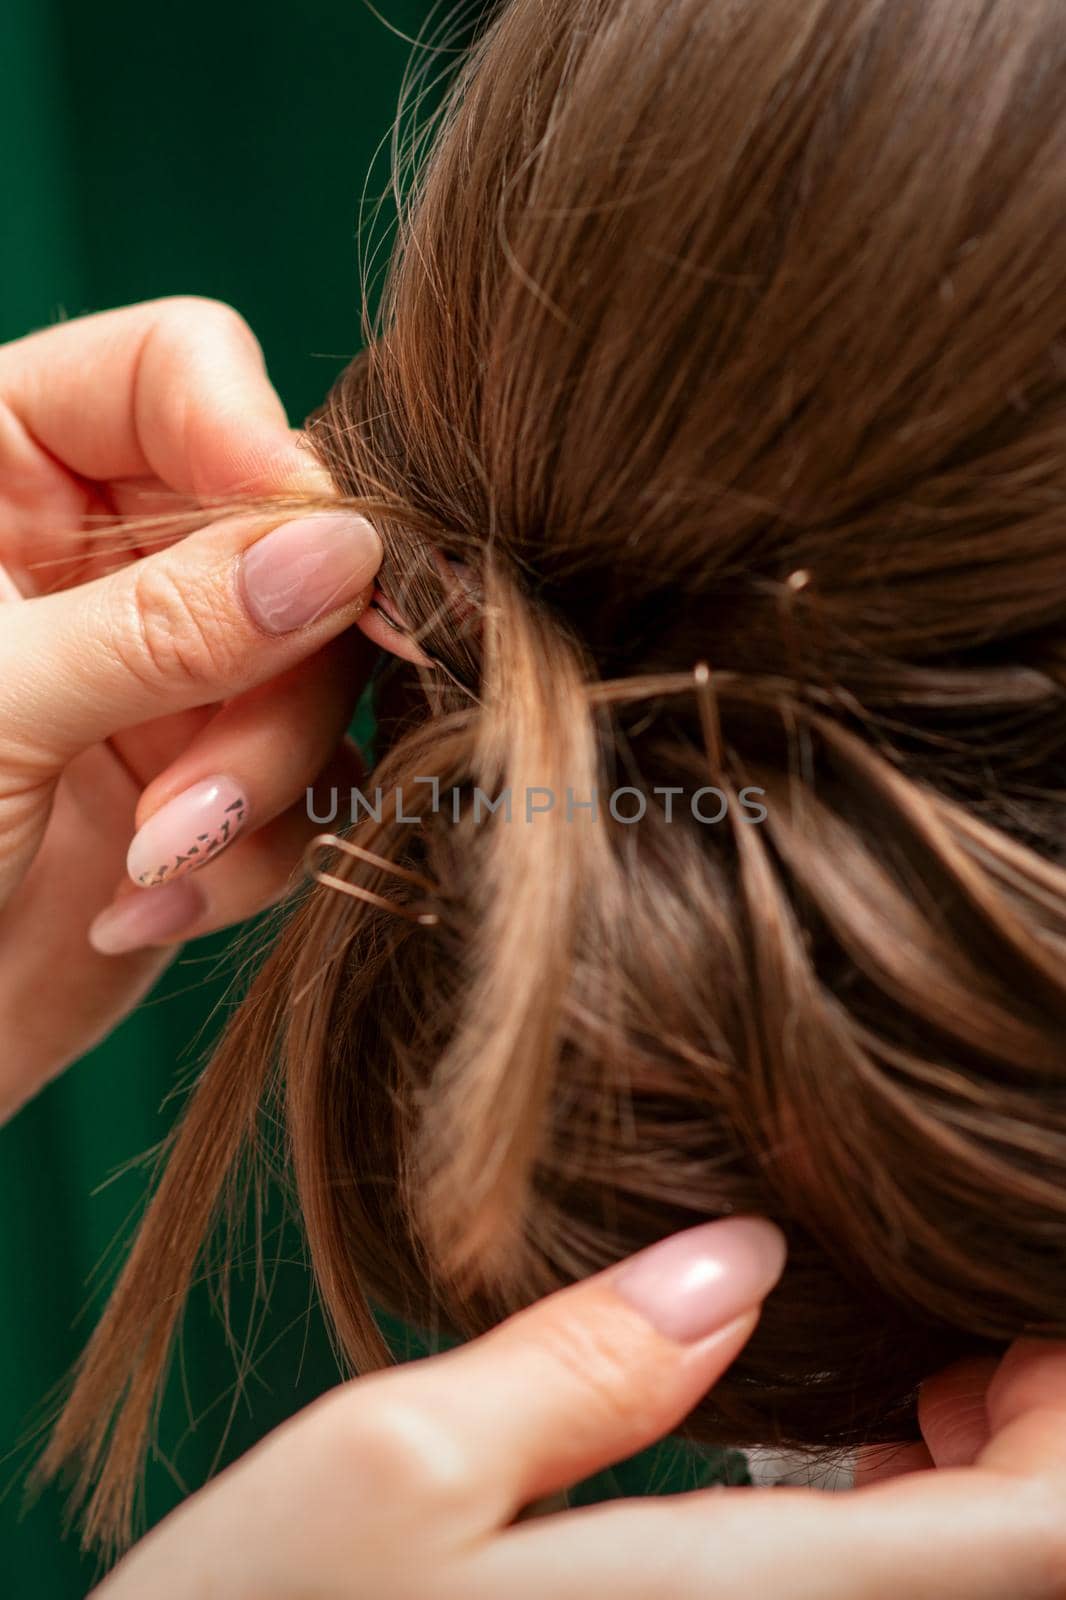 Hairdresser makes hairstyles for a young woman in beauty salon close up. by okskukuruza